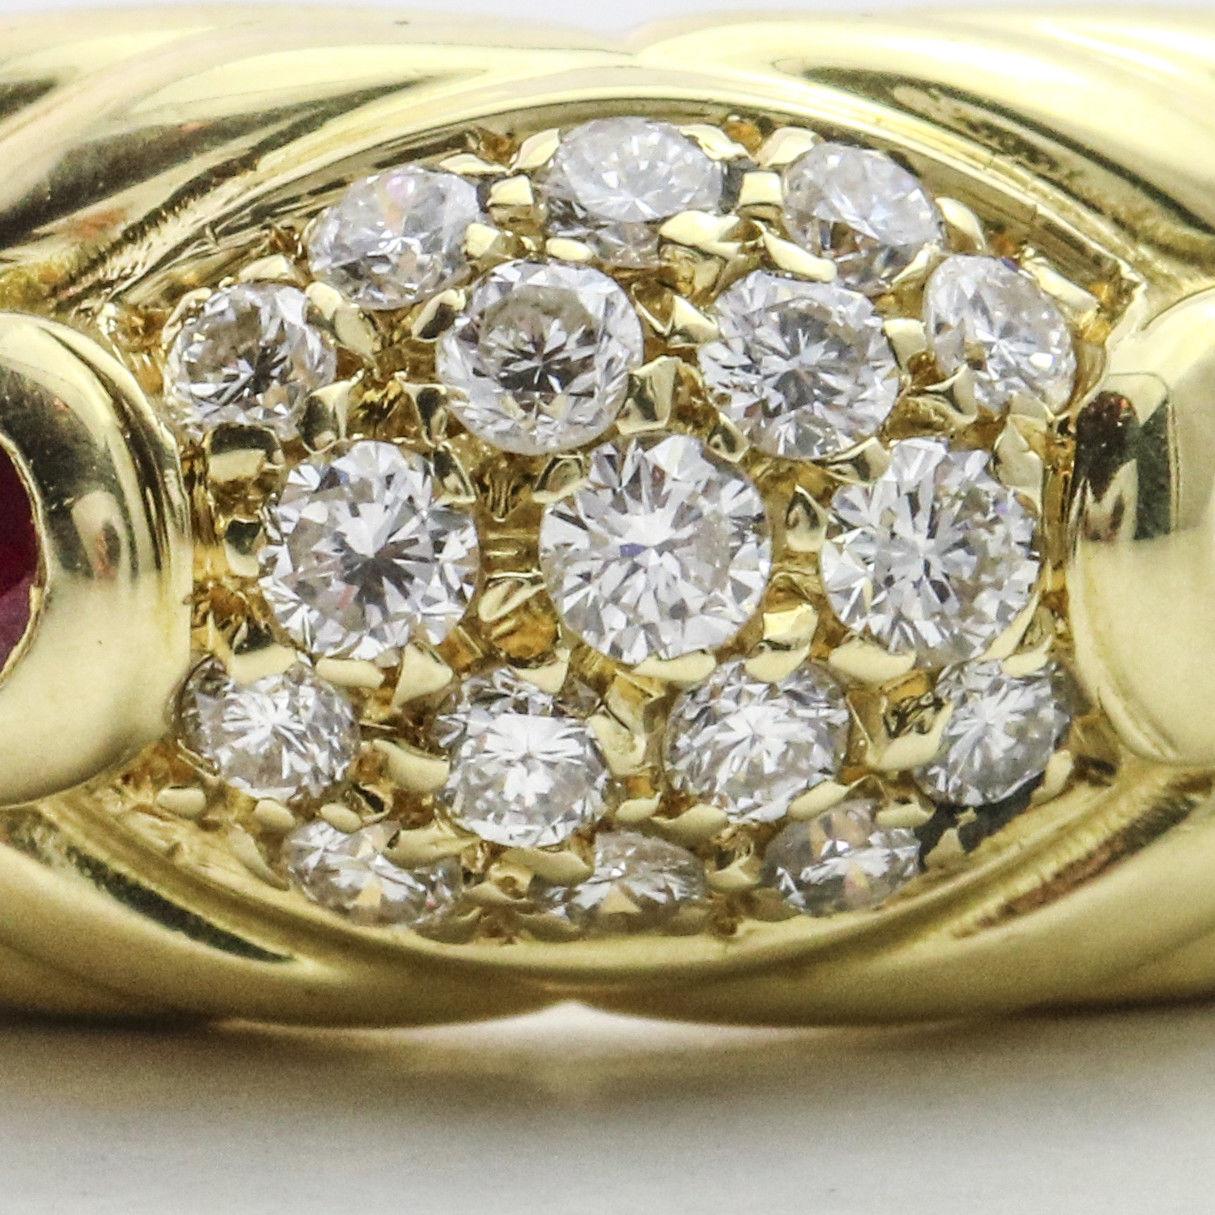 Vintage Salavetti 18k yellow gold band with pave-set round diamonds and two pear ruby accents. Size 6. Estimated total carat weight, .50 carats. Guaranteed Authentic.

Previously owned, in excellent condition with expected wear. Professionally